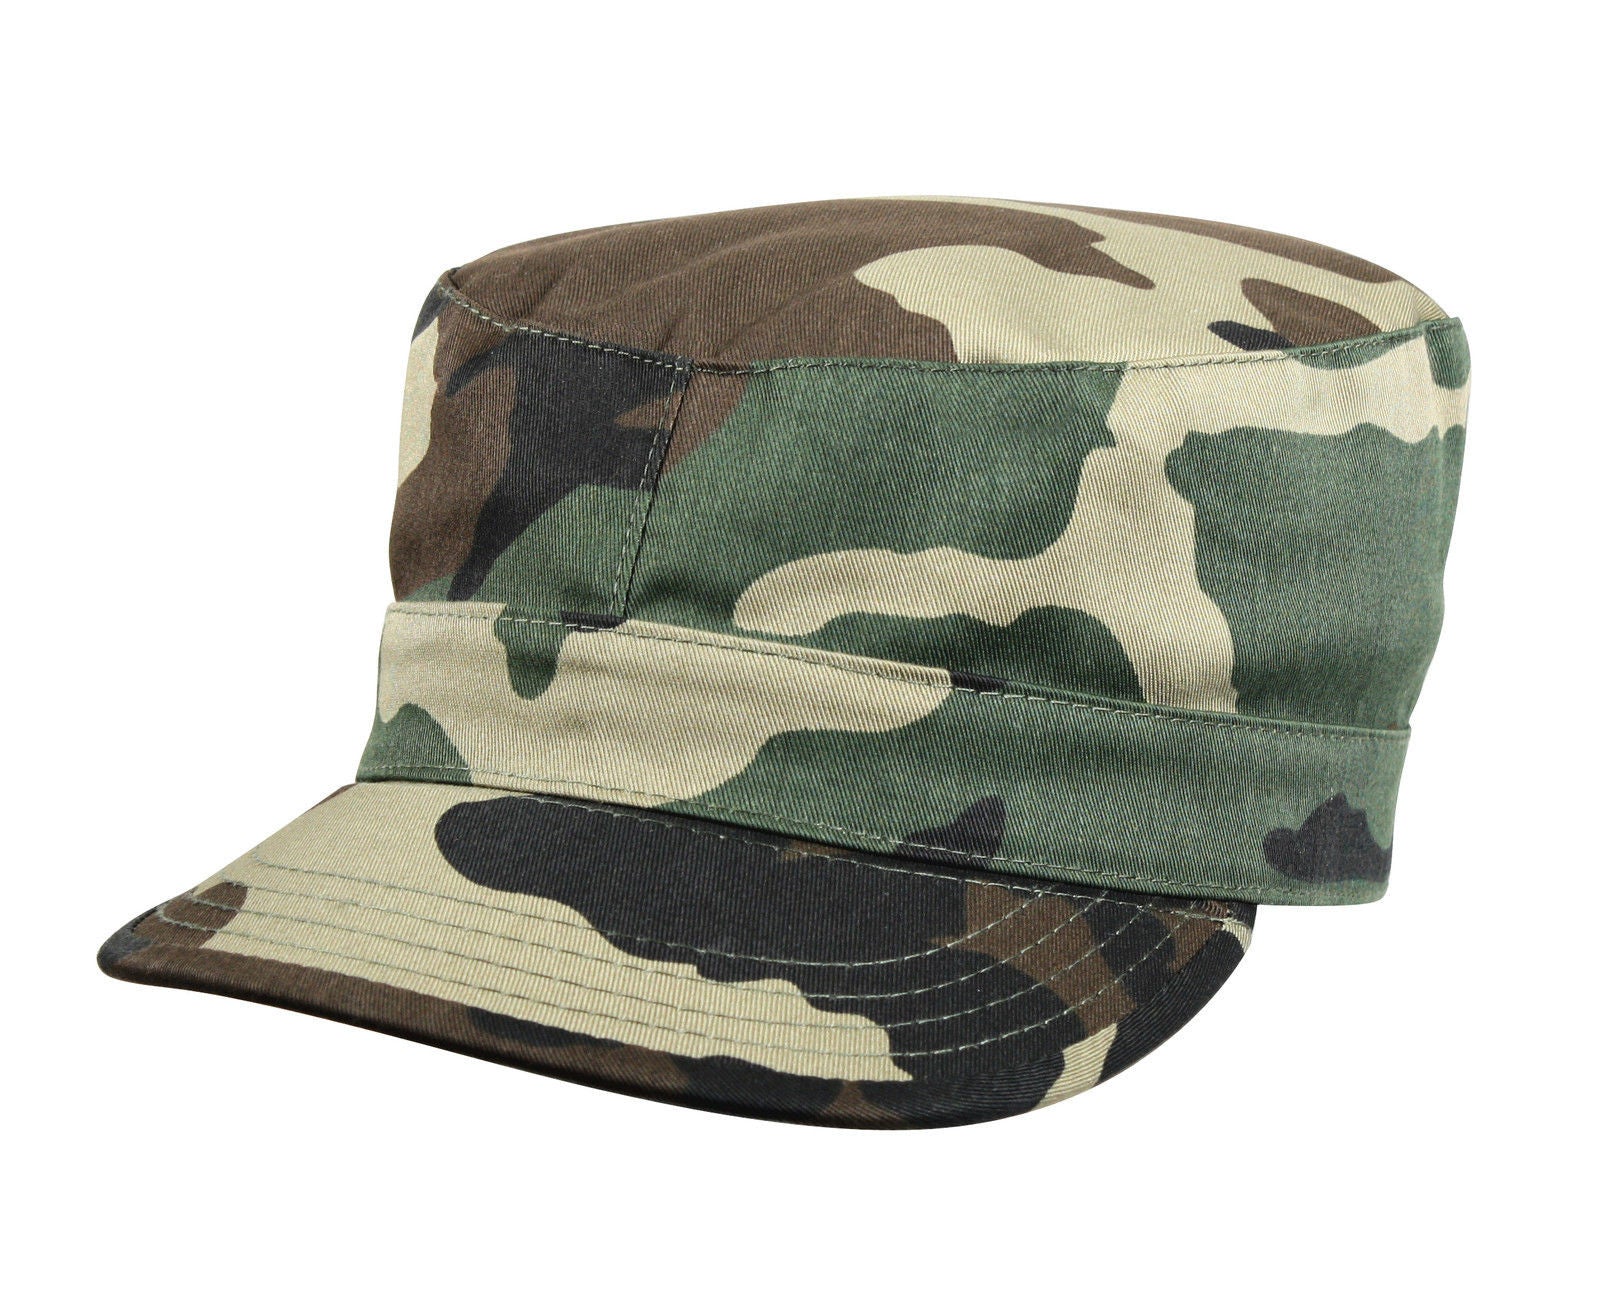 Men's Military Style Caps - Camo Rip-Stop Cotton Fatigue Cap Fitted Ha ...